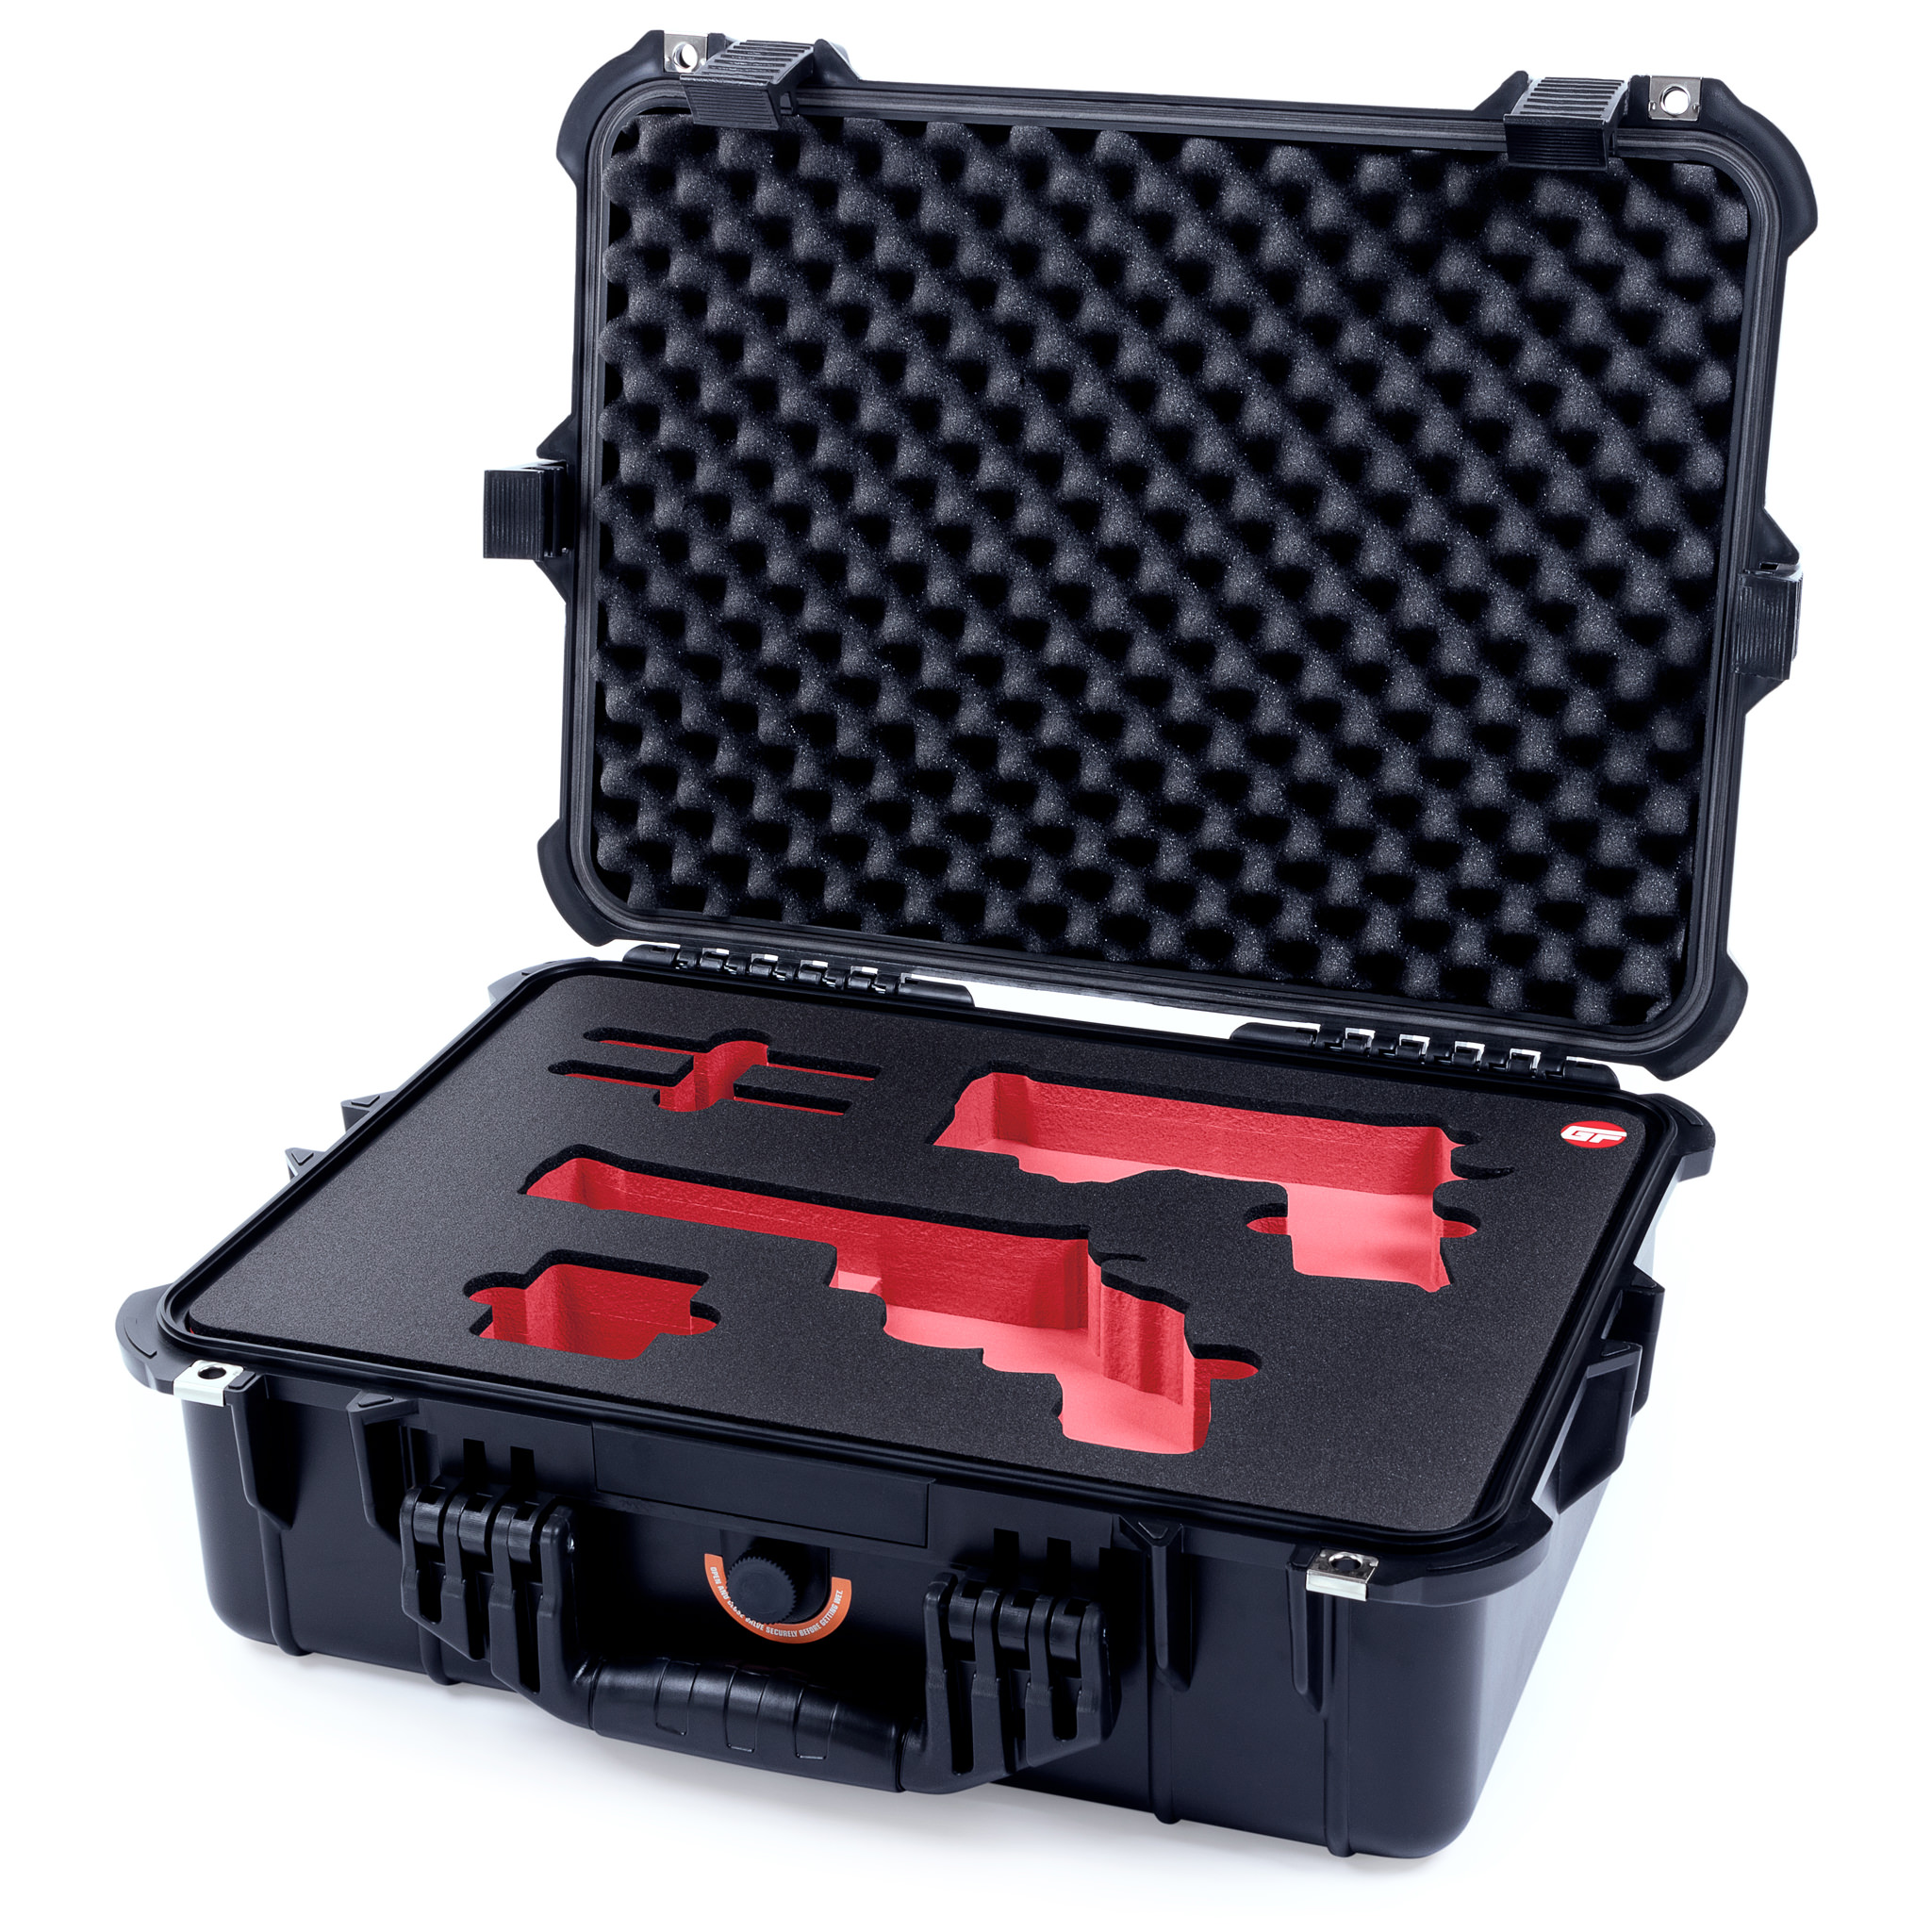  Case Club Foam Only to Fit Apache 4800 (Harbor Freight) - 5  Pistol & Accessory Foam Set with Silica Gel Canister to Help Prevent Rust  (5 Pistol Acc) : Sports & Outdoors